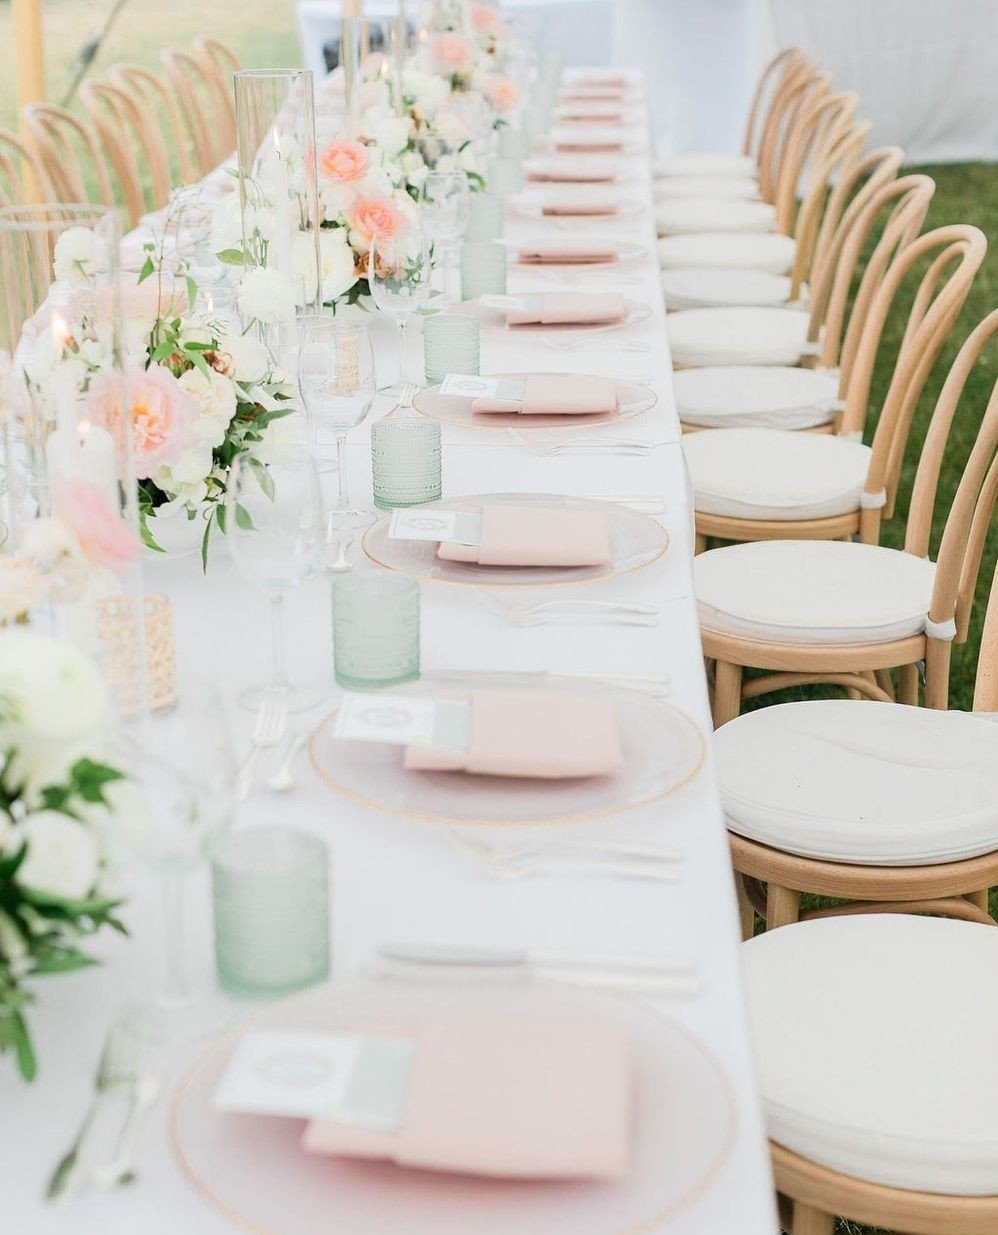 Let's be real, when you're sitting down to dinner with your nearest and dearest, you want everything to be picture-perfect. 📸 That's why we obsess over every single detail, from the chargers to the napkin folds. ⁠
⁠
We'll make sure your tablescape i